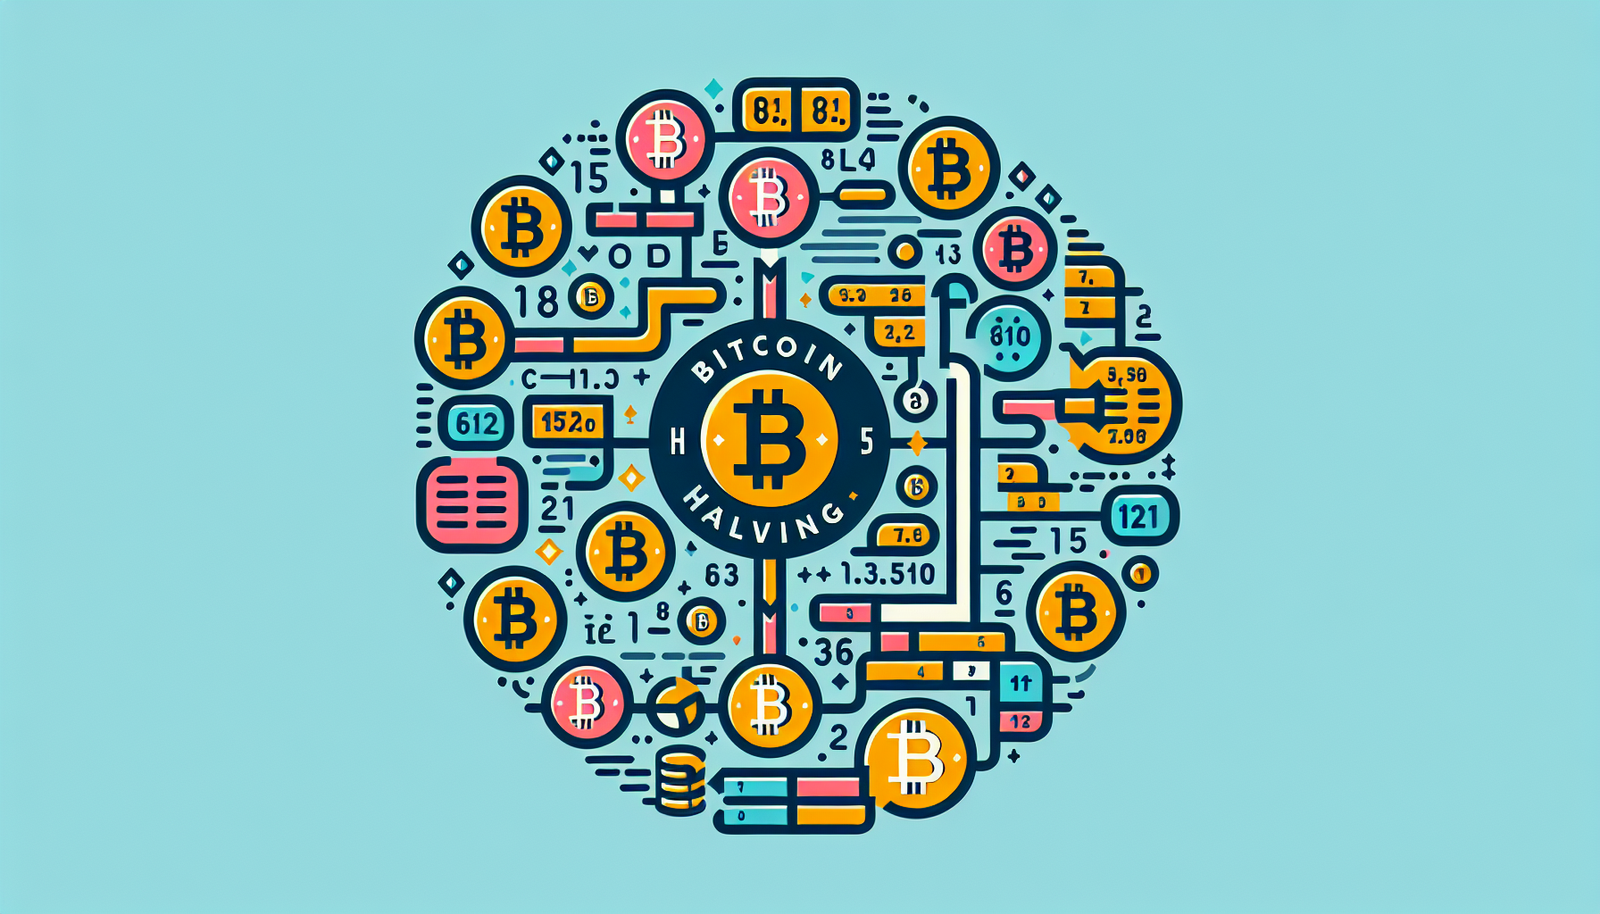 Generate a colorful, modern and purely illustrative image that explains the concept of Bitcoin halving as per a simple guide. The image should be easily understandable and free from textual descriptions. It should feature elements such as Bitcoins, symbols that represent division or halving, and a numerical timeline or flowchart to showcase the chronological and cyclic nature of the halving process.